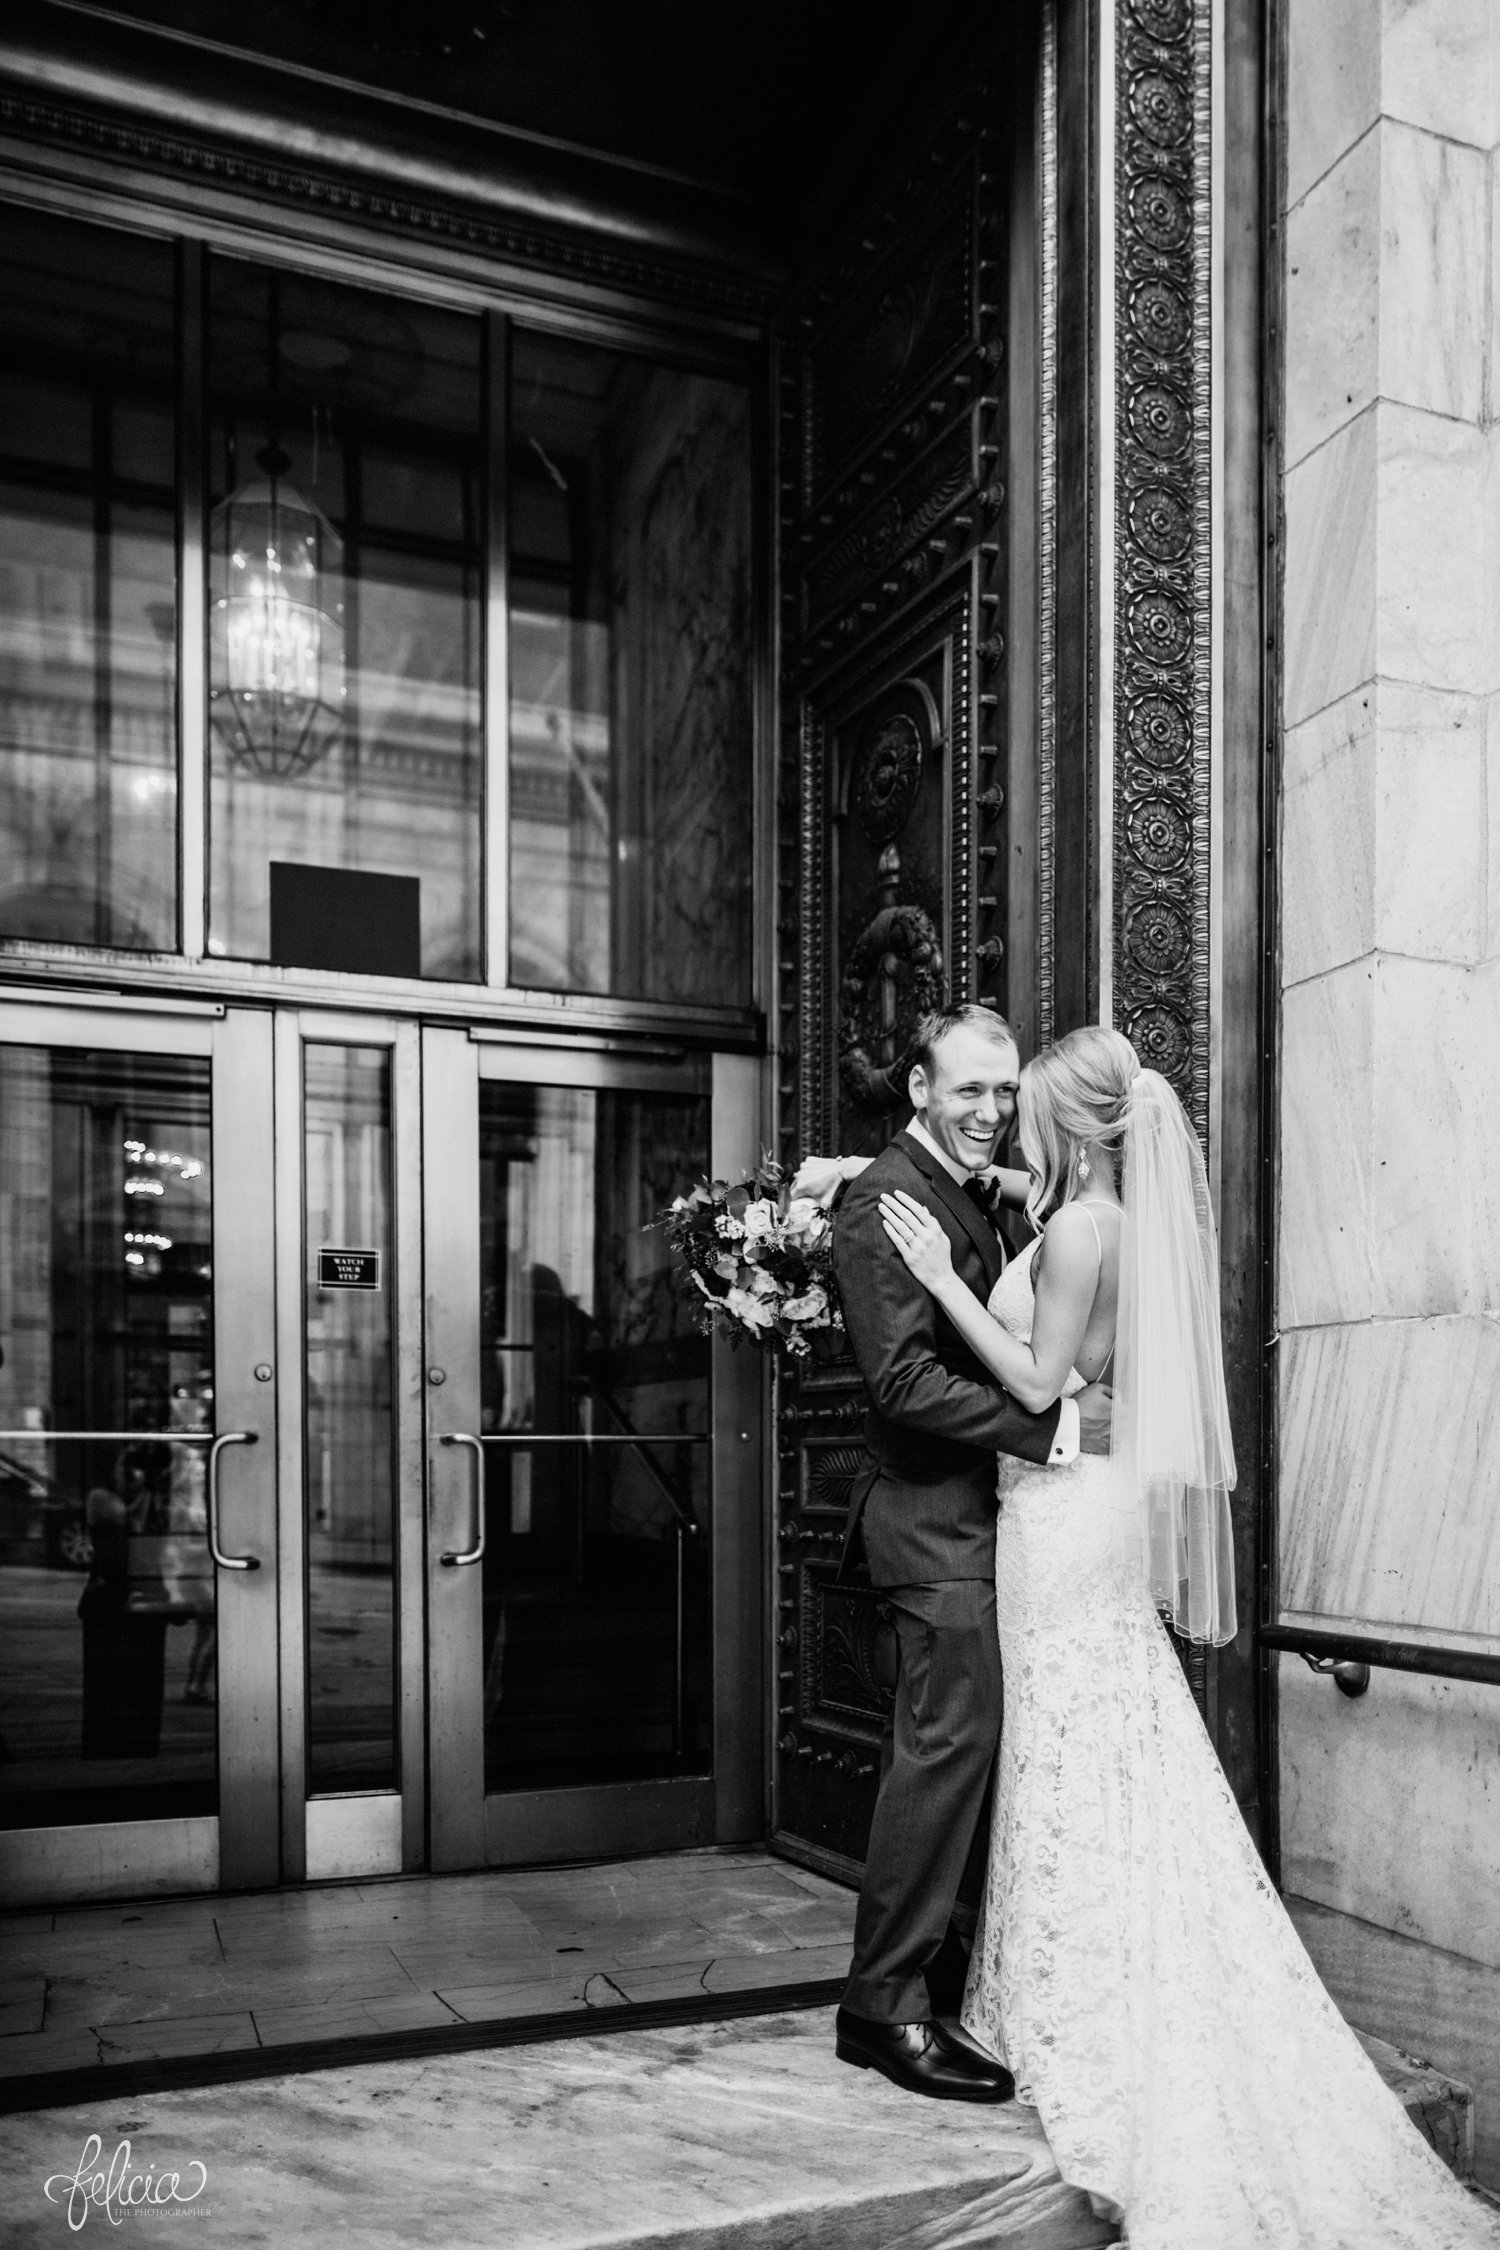 images by feliciathephotographer.com | destination wedding photographer | kansas city | couple portraits | bride and groom | public library | full florals | light pink and red | wild hill | lace dress | fabulous frocks | tip top tix | grey suit | black and white | laughter | 